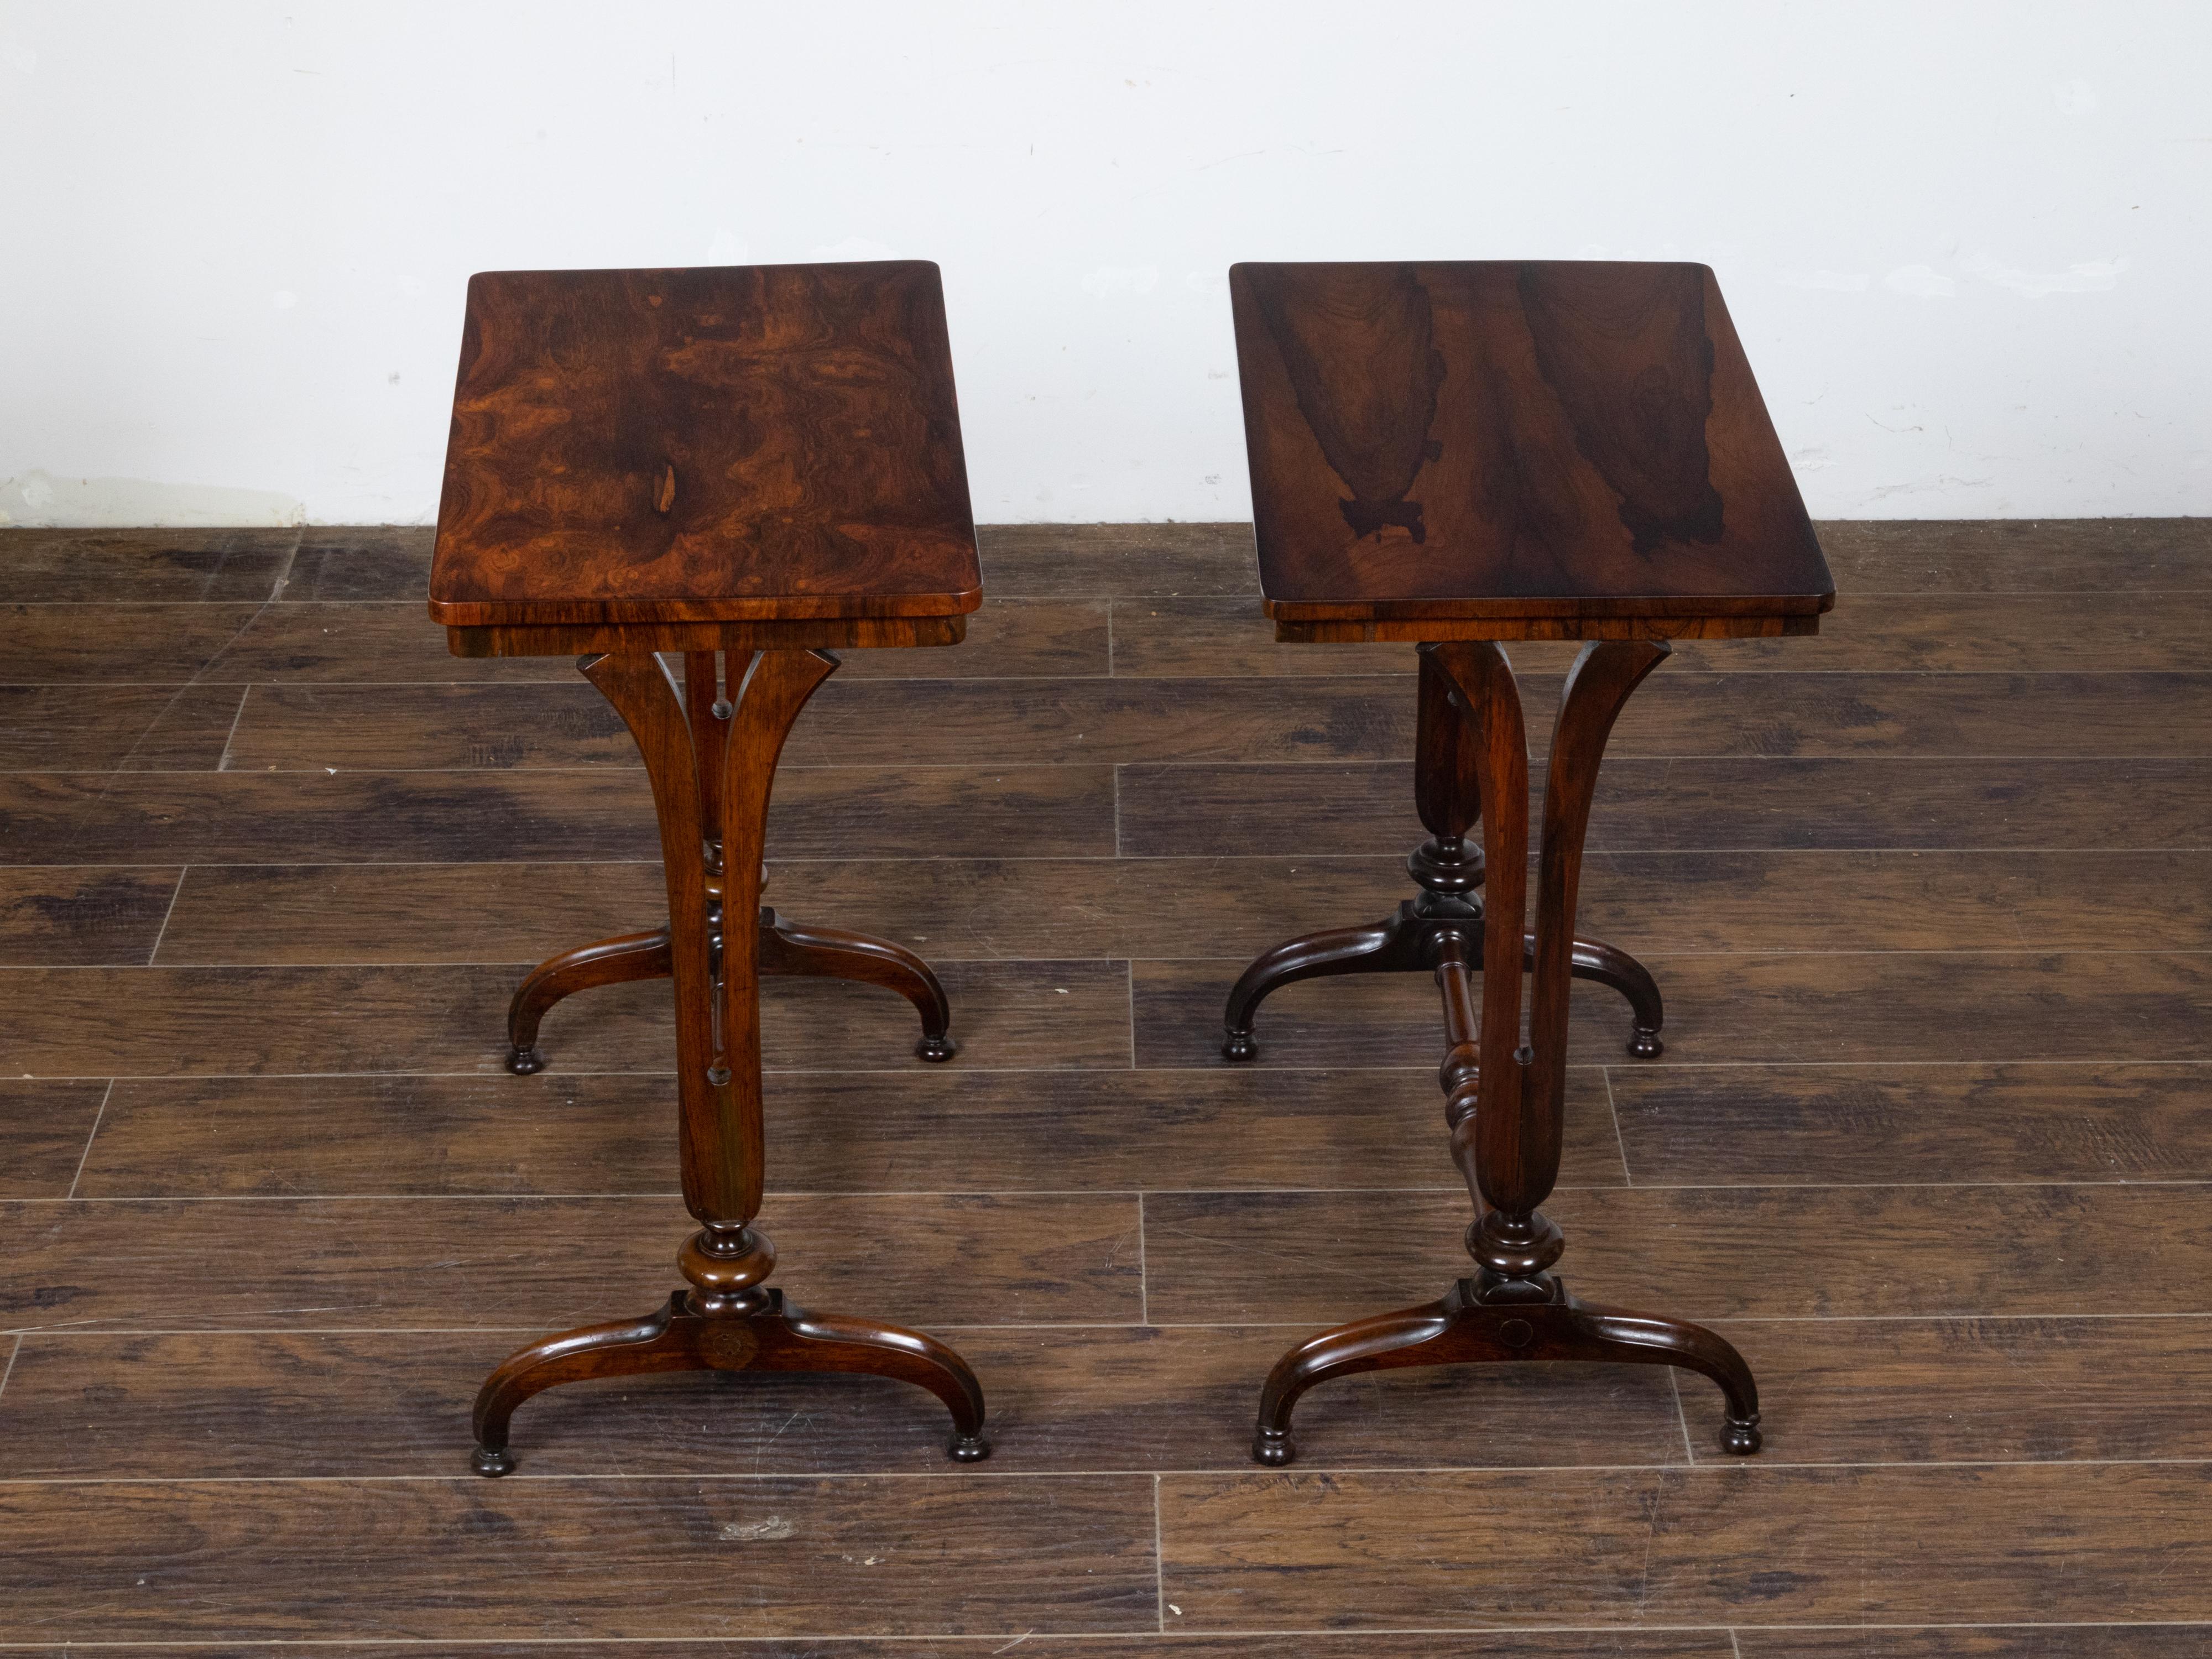 A pair of English Regency period wooden console tables from the 19th century with veneered top, curving legs, arching feet and spindle shaped cross stretchers. This pair of English Regency period wooden console tables, dating back to the 19th